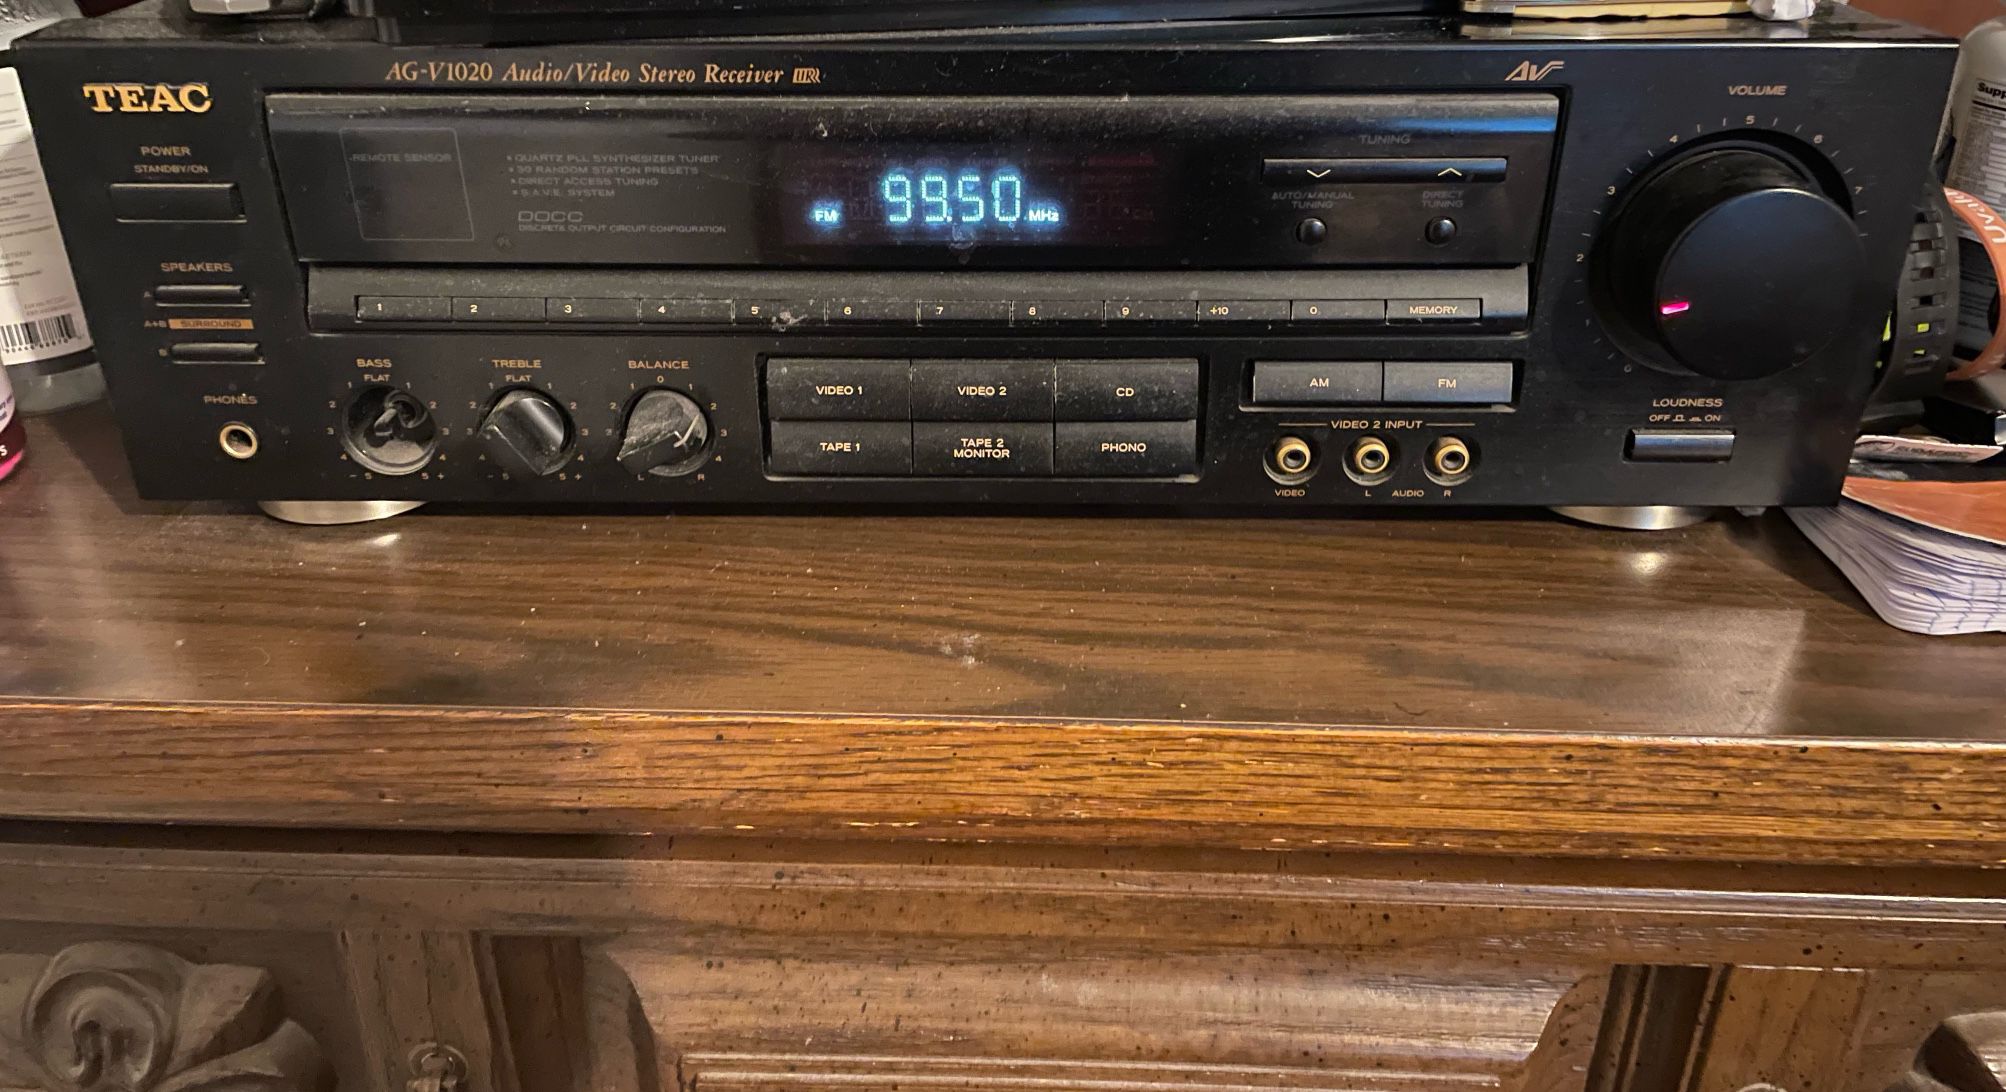 TEAC Stereo Receiver 